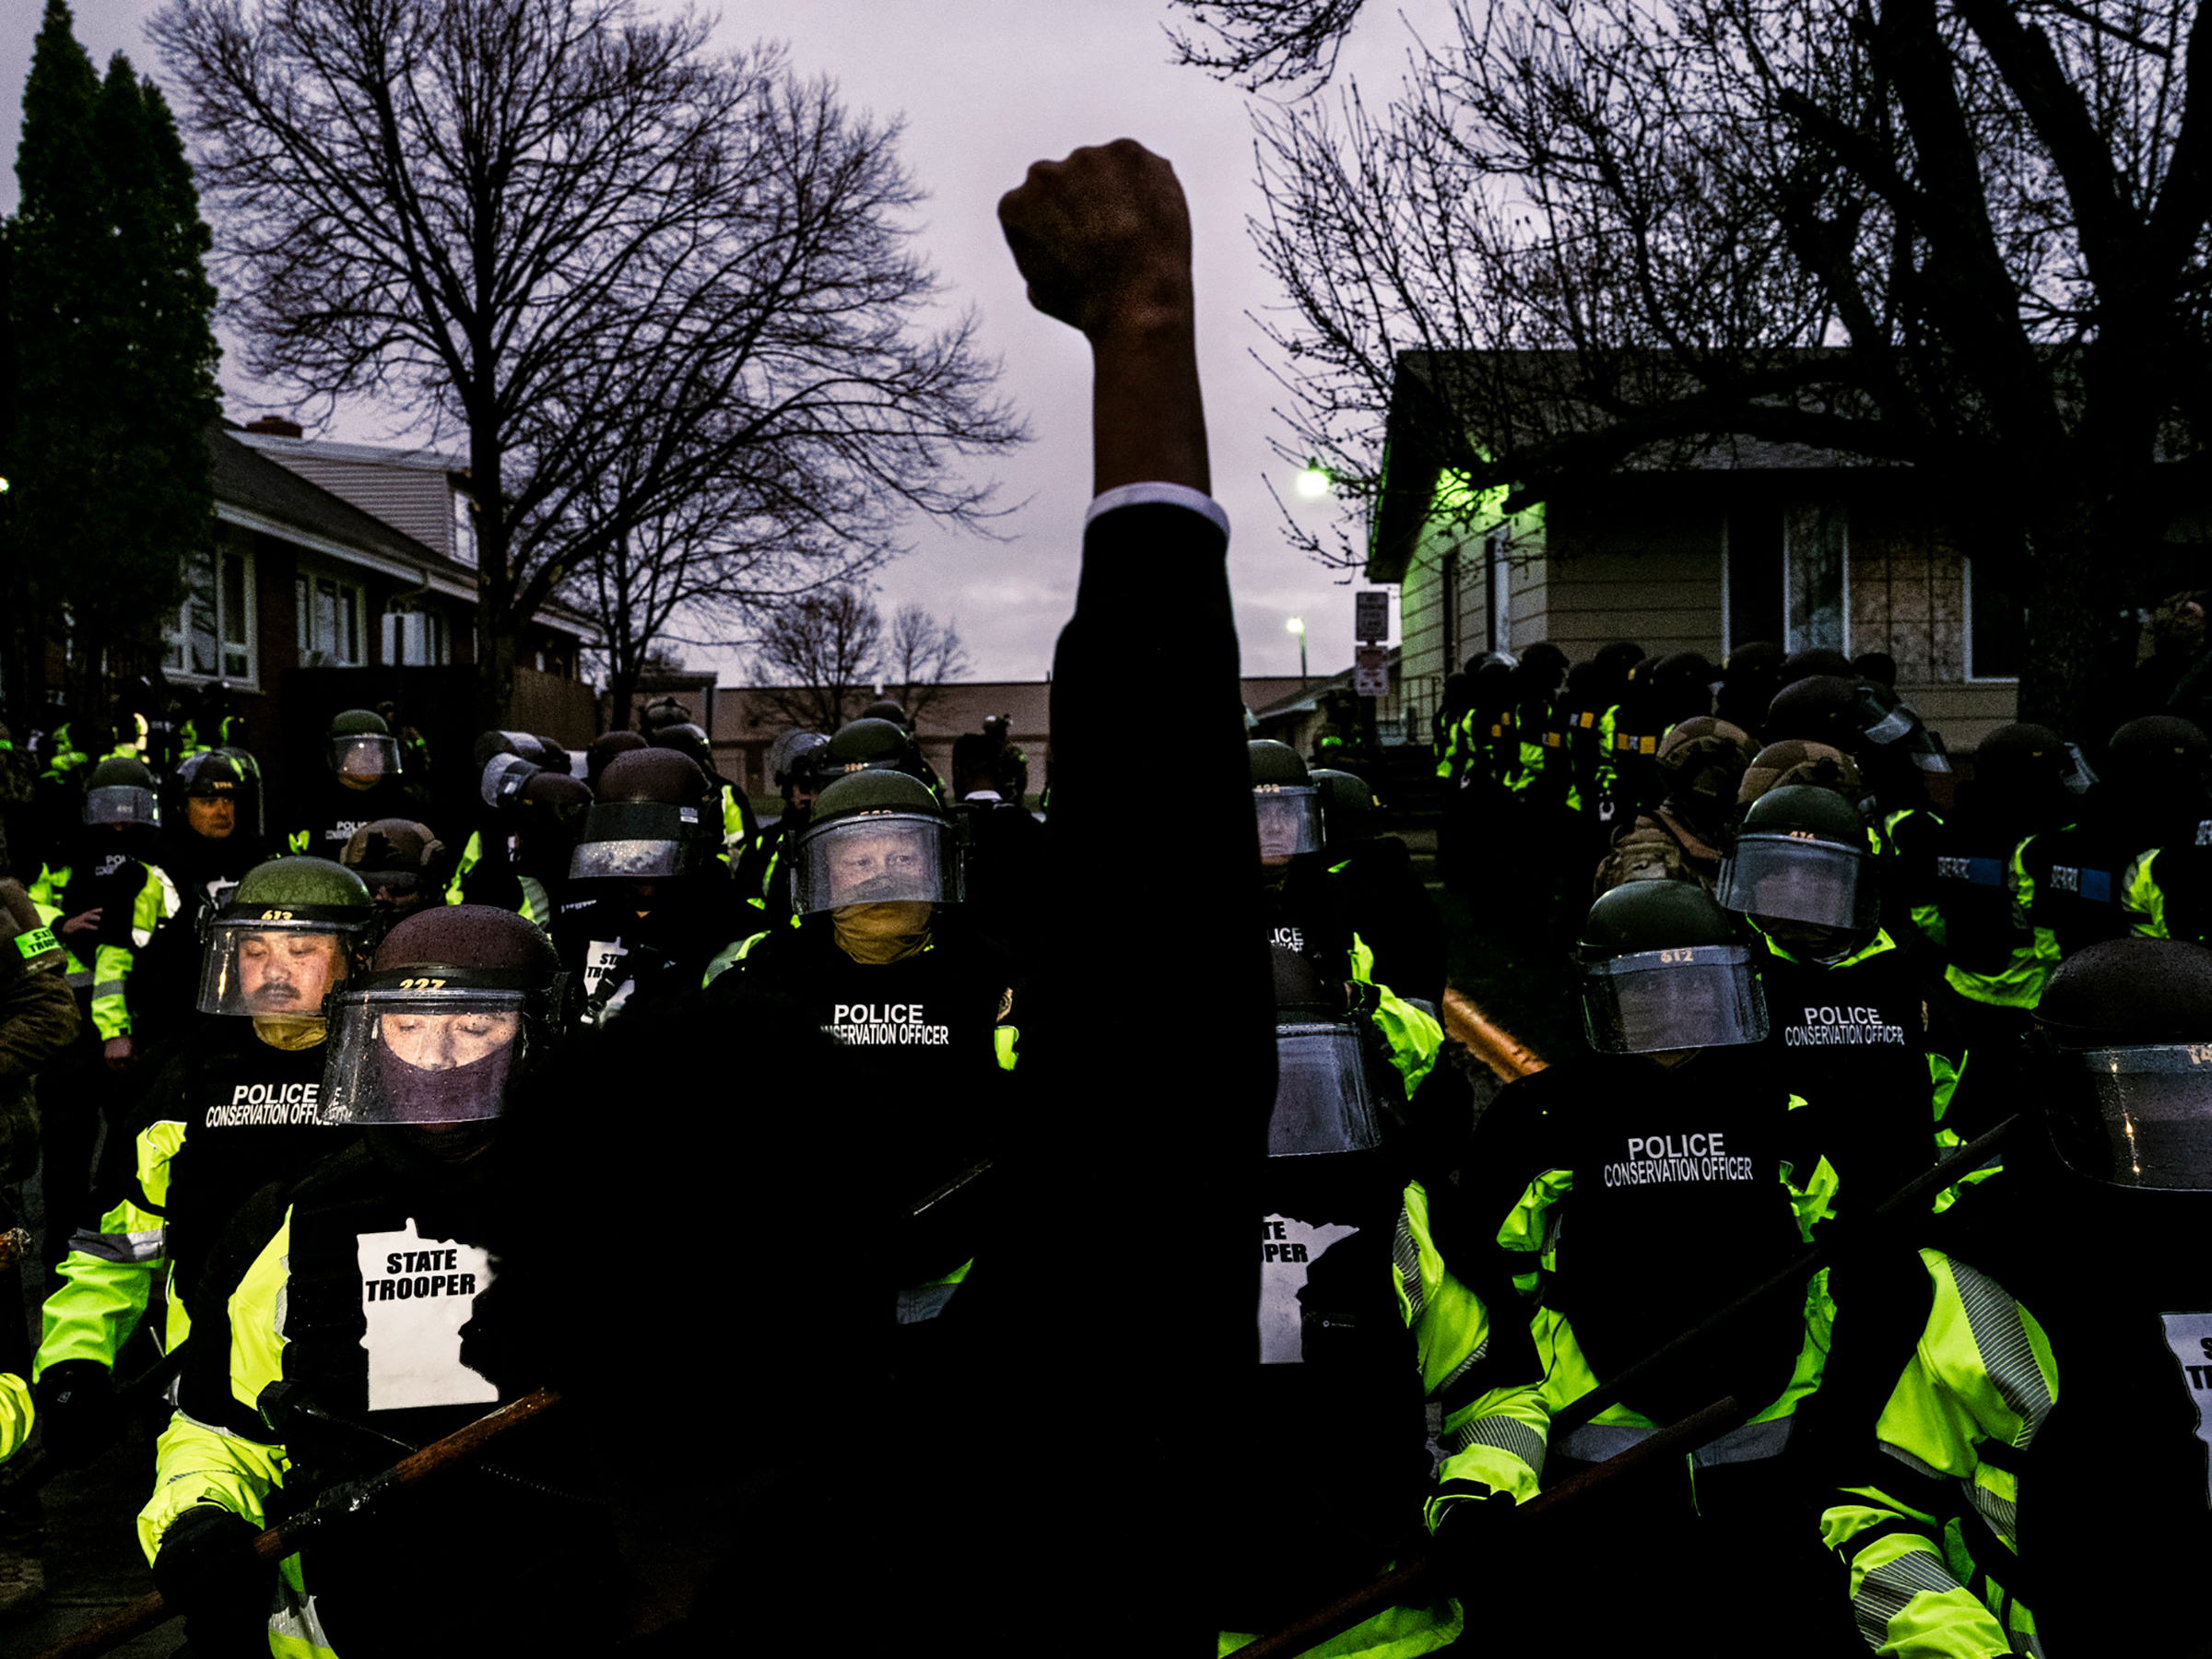 Protesters confront law enforcement officers in Brooklyn Center, Minn., on April 12, one day after 20-year-old Daunte Wright was killed during a traffic stop. The fatal shooting by a police officer came during the trial of former Minneapolis police officer Derek Chauvin, who was charged in the May 2020 killing of George Floyd. Chauvin was found guilty on all counts in April. The trial of the officer involved in the Wright shooting is scheduled to begin in late November.